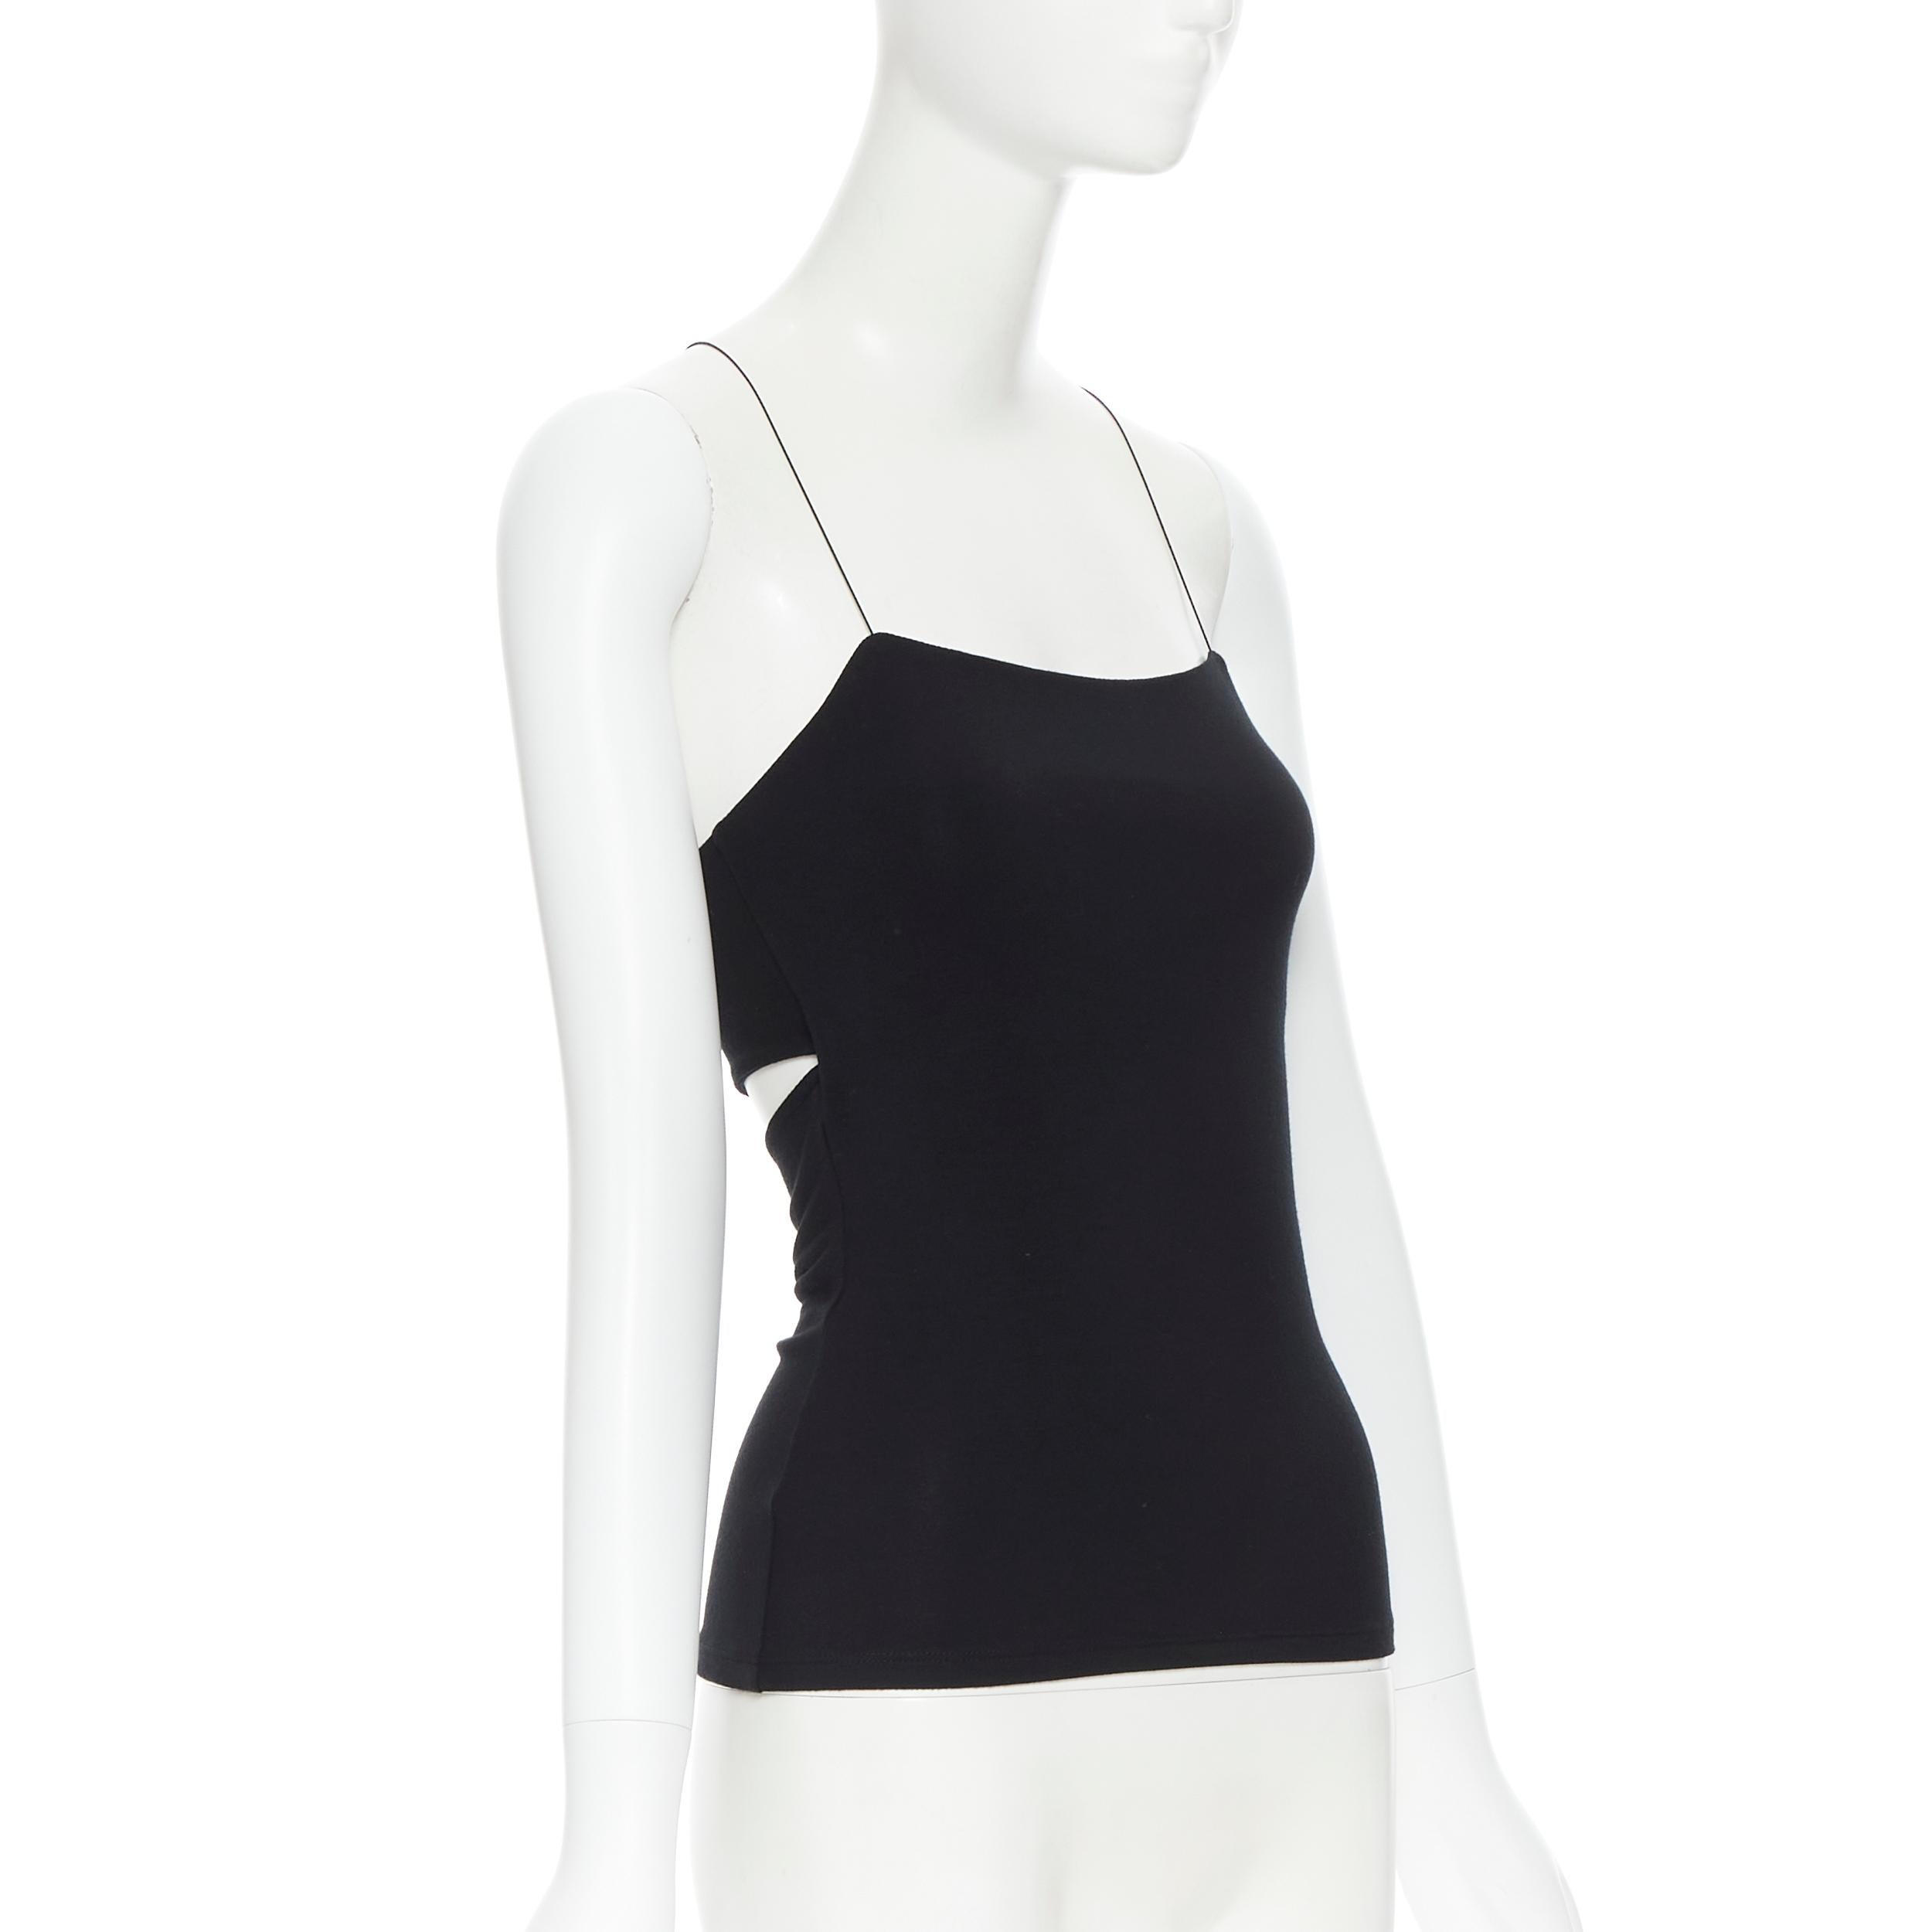 T ALEXANDER WANG black cross spaghetti strap open back tank top XS 
Reference: LNKO/A01738 
Brand: T by Alexander Wang 
Designer: Alexander Wang 
Color: Black 
Pattern: Solid 
Extra Detail: Thin cross back strap. Cut out opening at back. Stretch